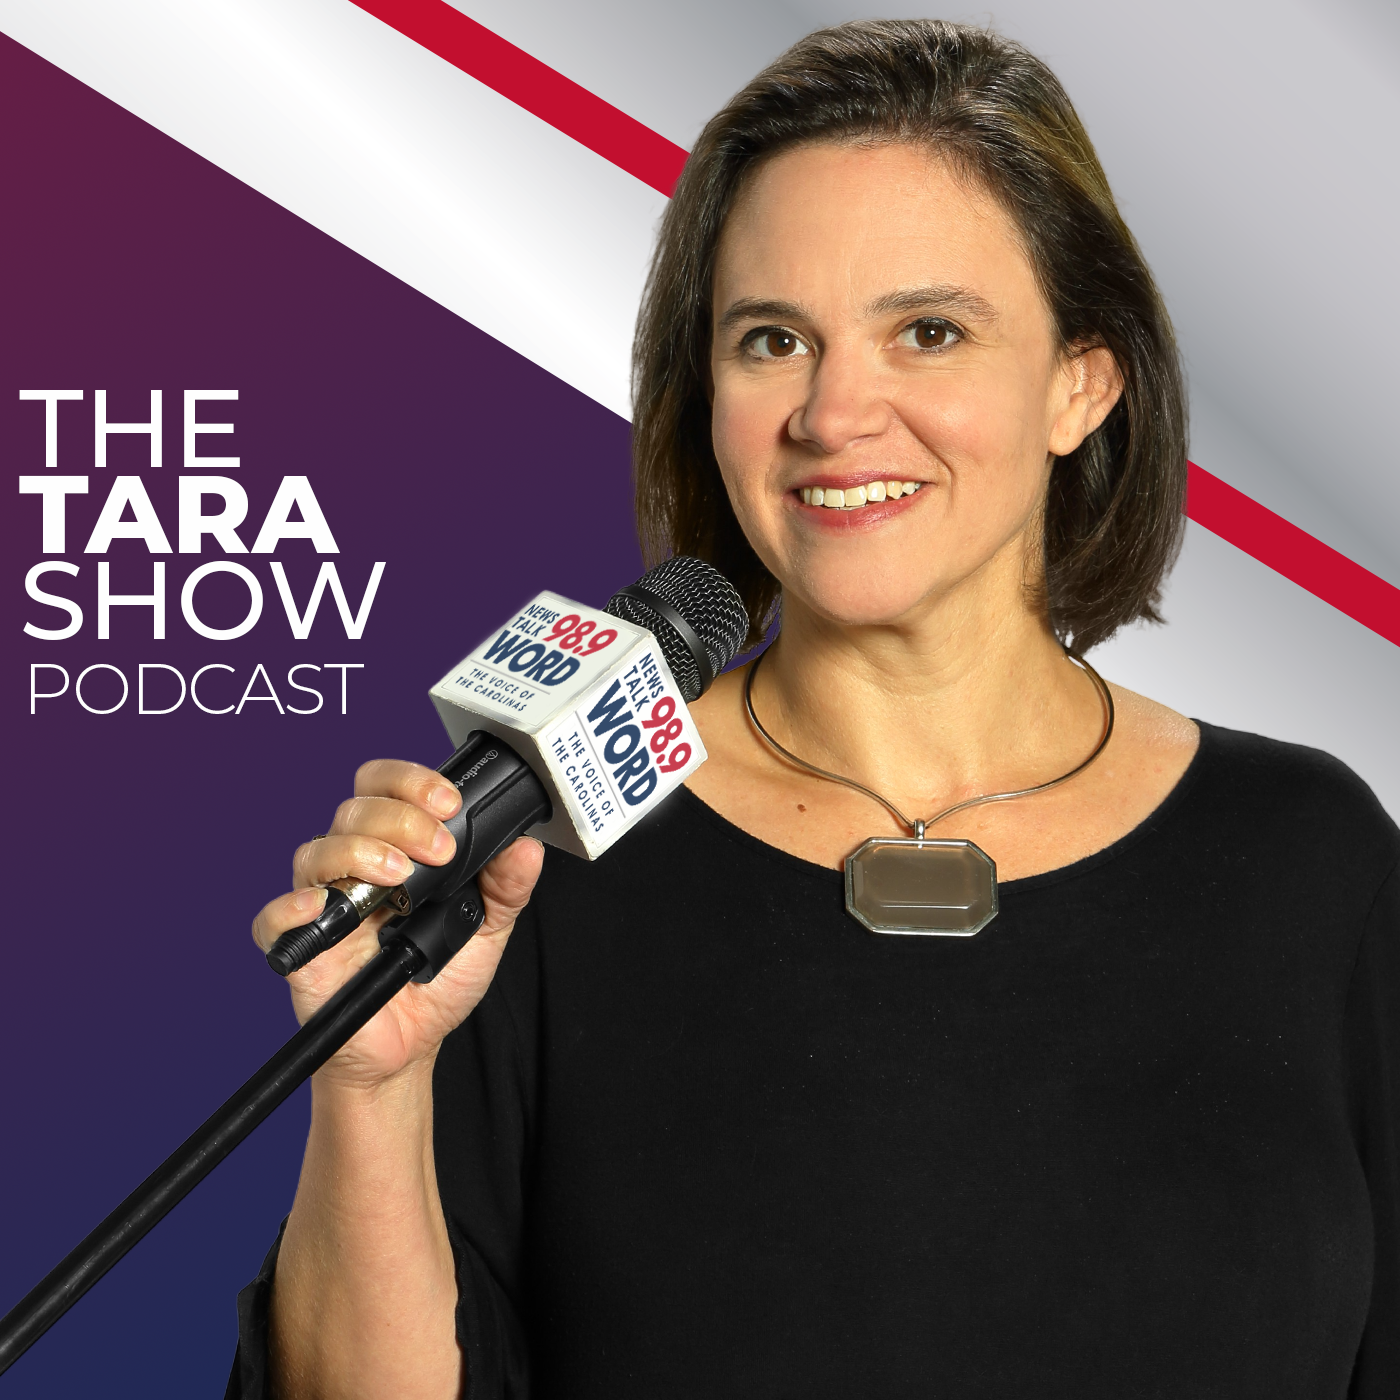 Hour 3: The Tara Show - “Ukrainian Americans with Tara and Natalia Camp” “The Future of the Democrat Party” “Republican Ads Censored” ”The Absolute Disgust of the Radical Left” 